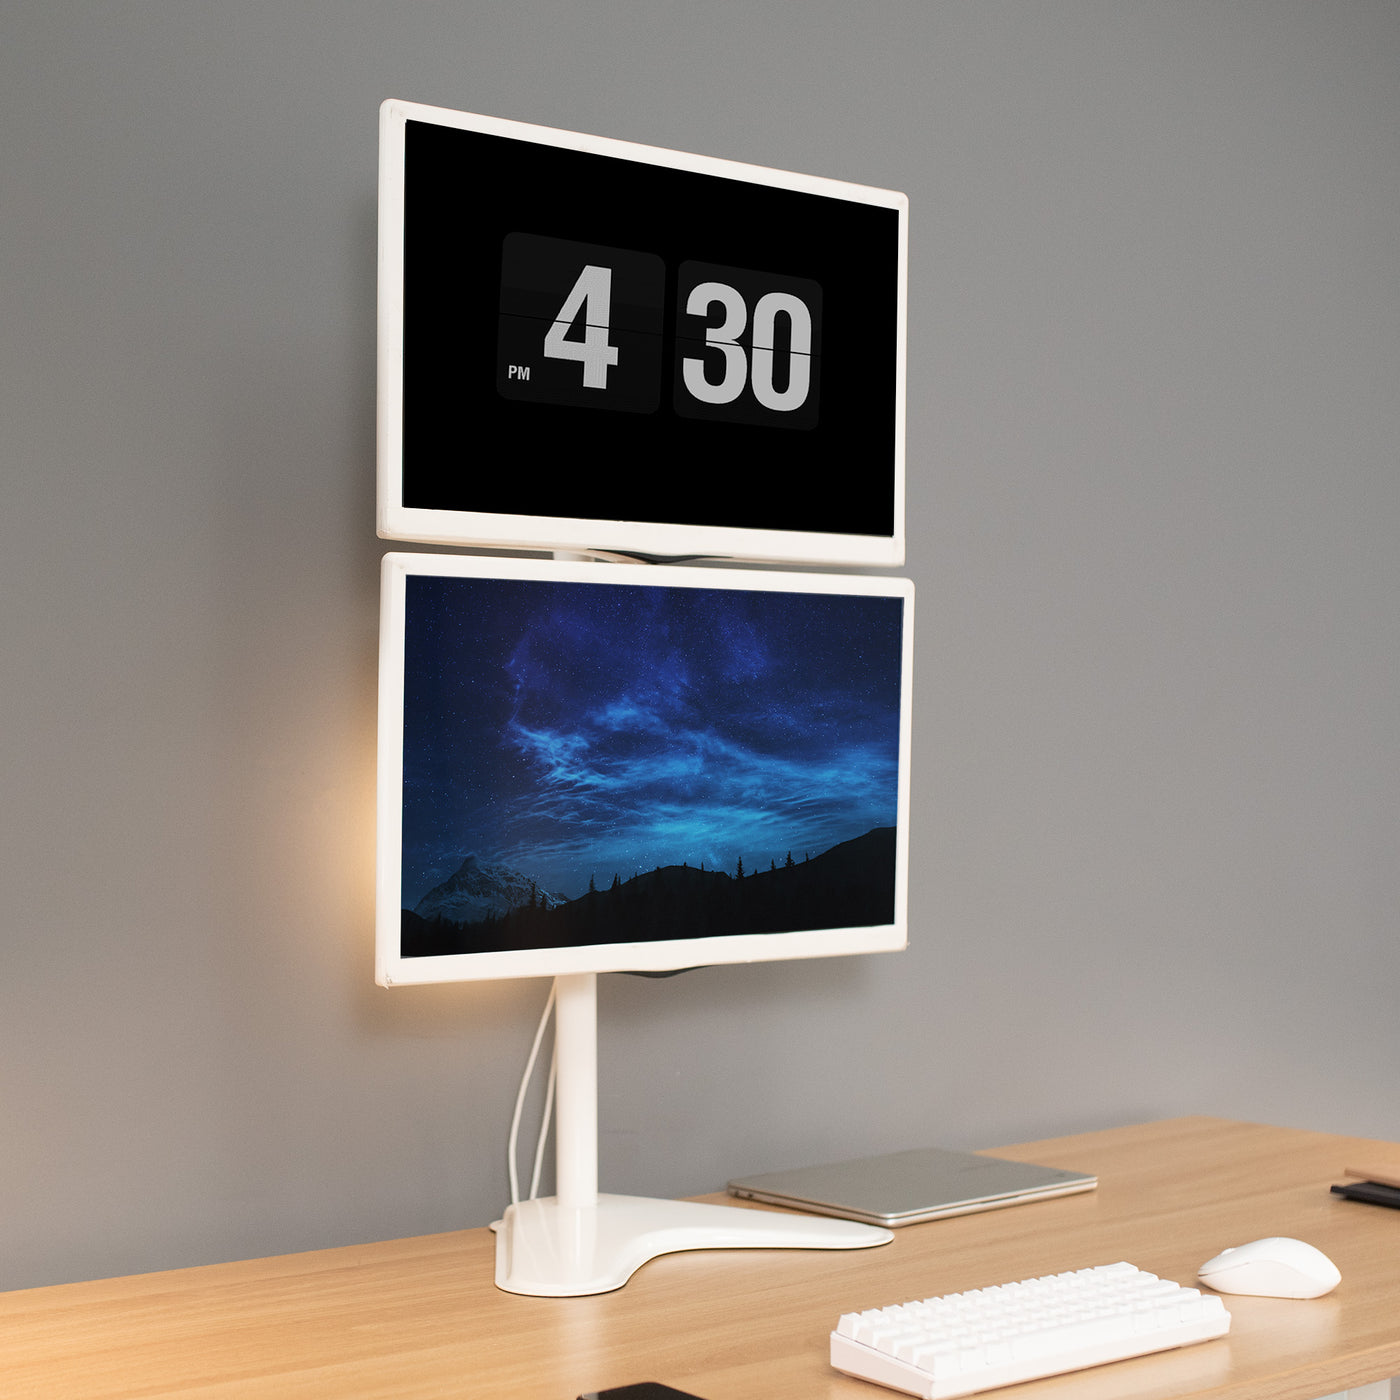 Dual Vertical Monitor Desk Stand